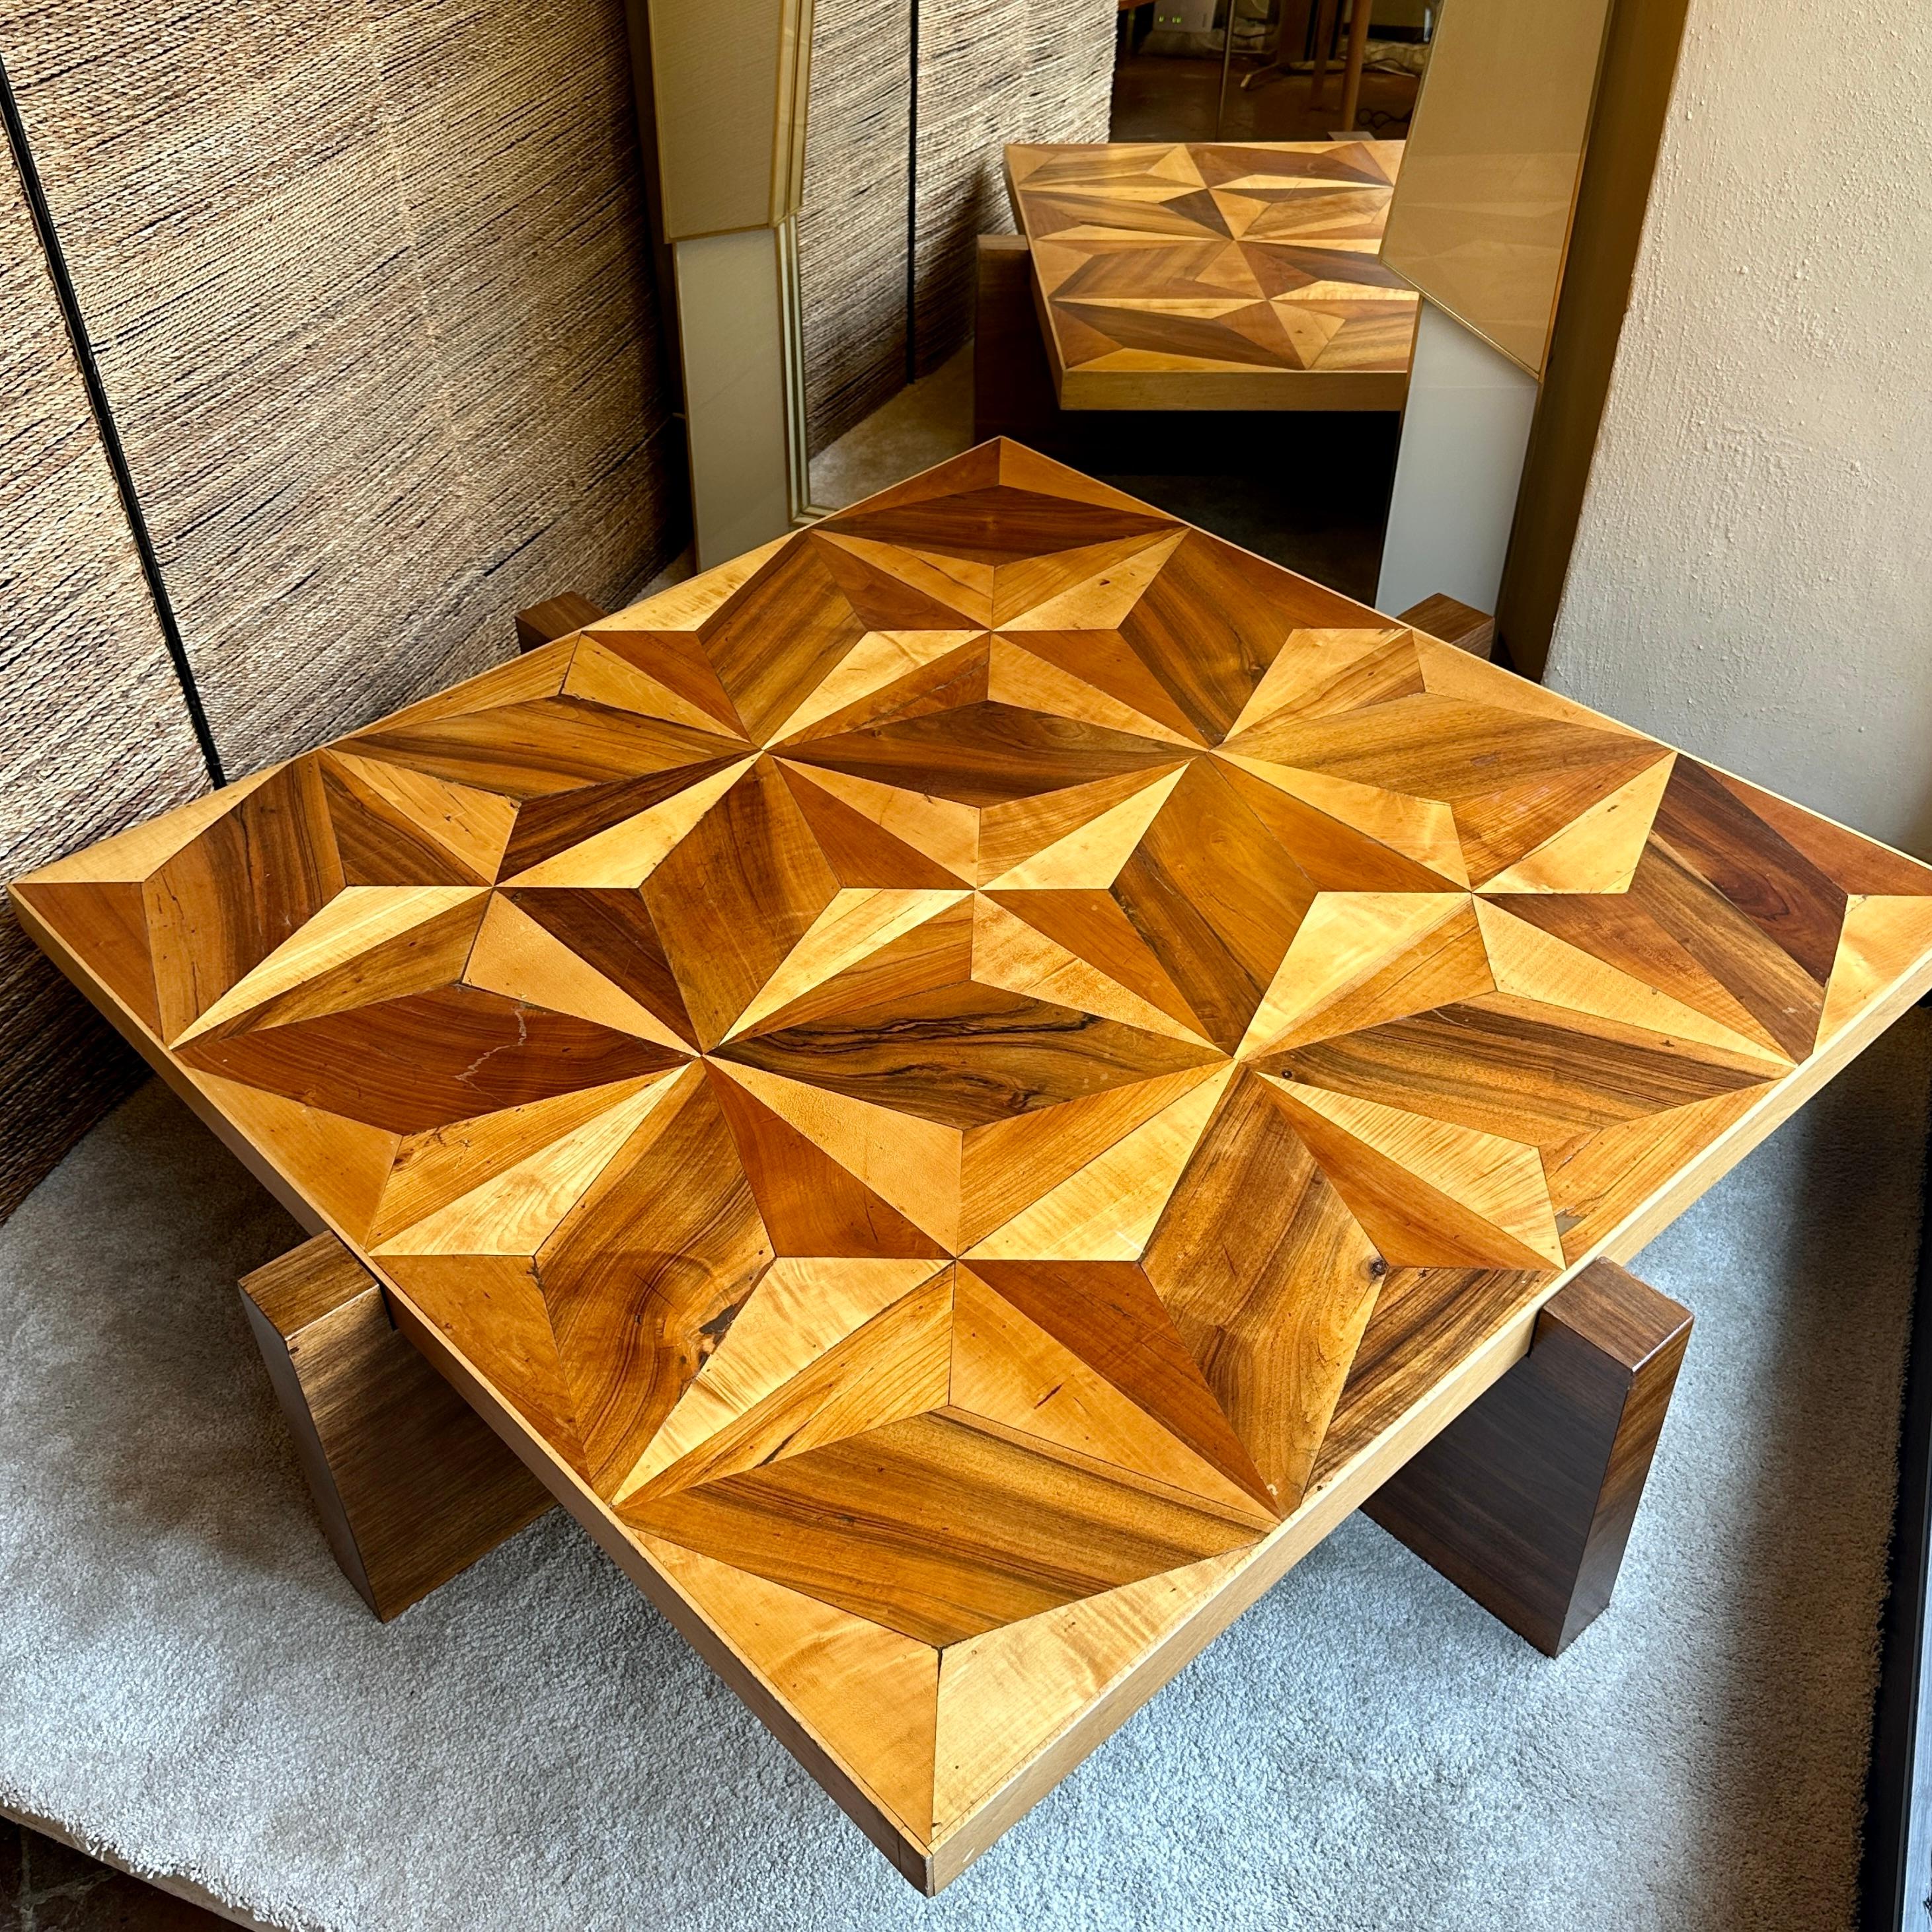 A stunning conversation piece for almost any living room. This coffe table top made with a mix of cherry, walnut, maple and ash wood framed with beech wood (size: 125 x 125 x 5 H cm.) with 5 visible wind roses. Two crossed legs of venereed walnut